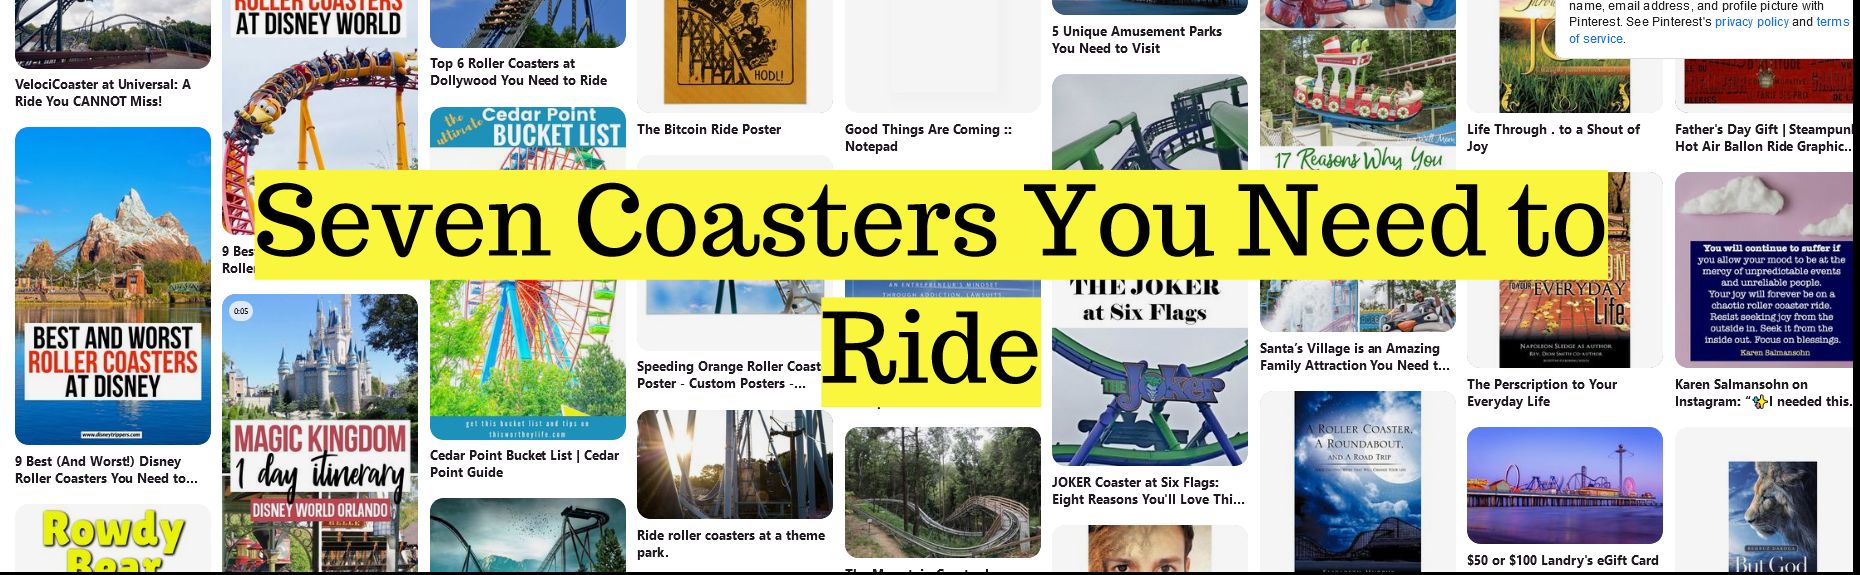 Seven Coasters You Need to Ride